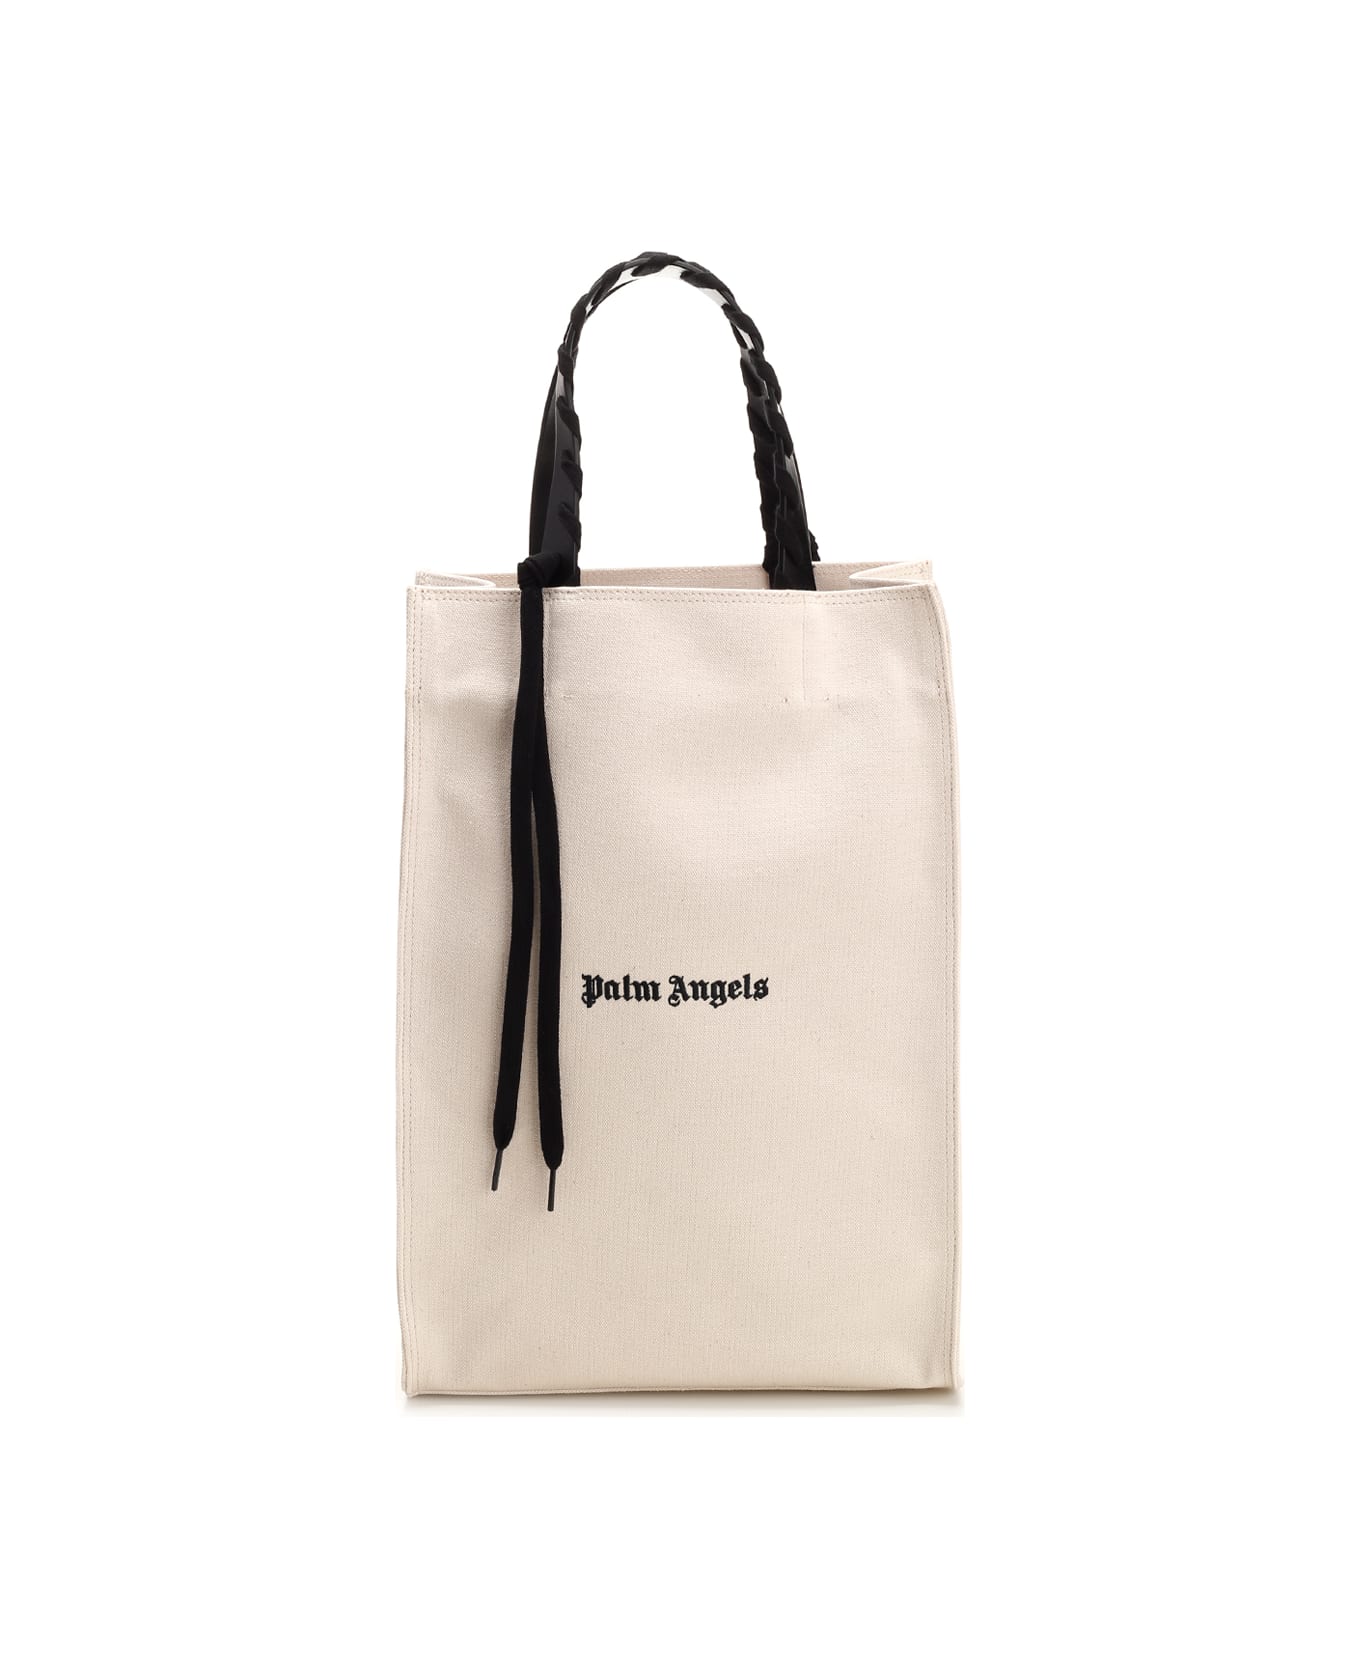 Palm Angels Ivory Cotton Tote Bag - NATURALBL